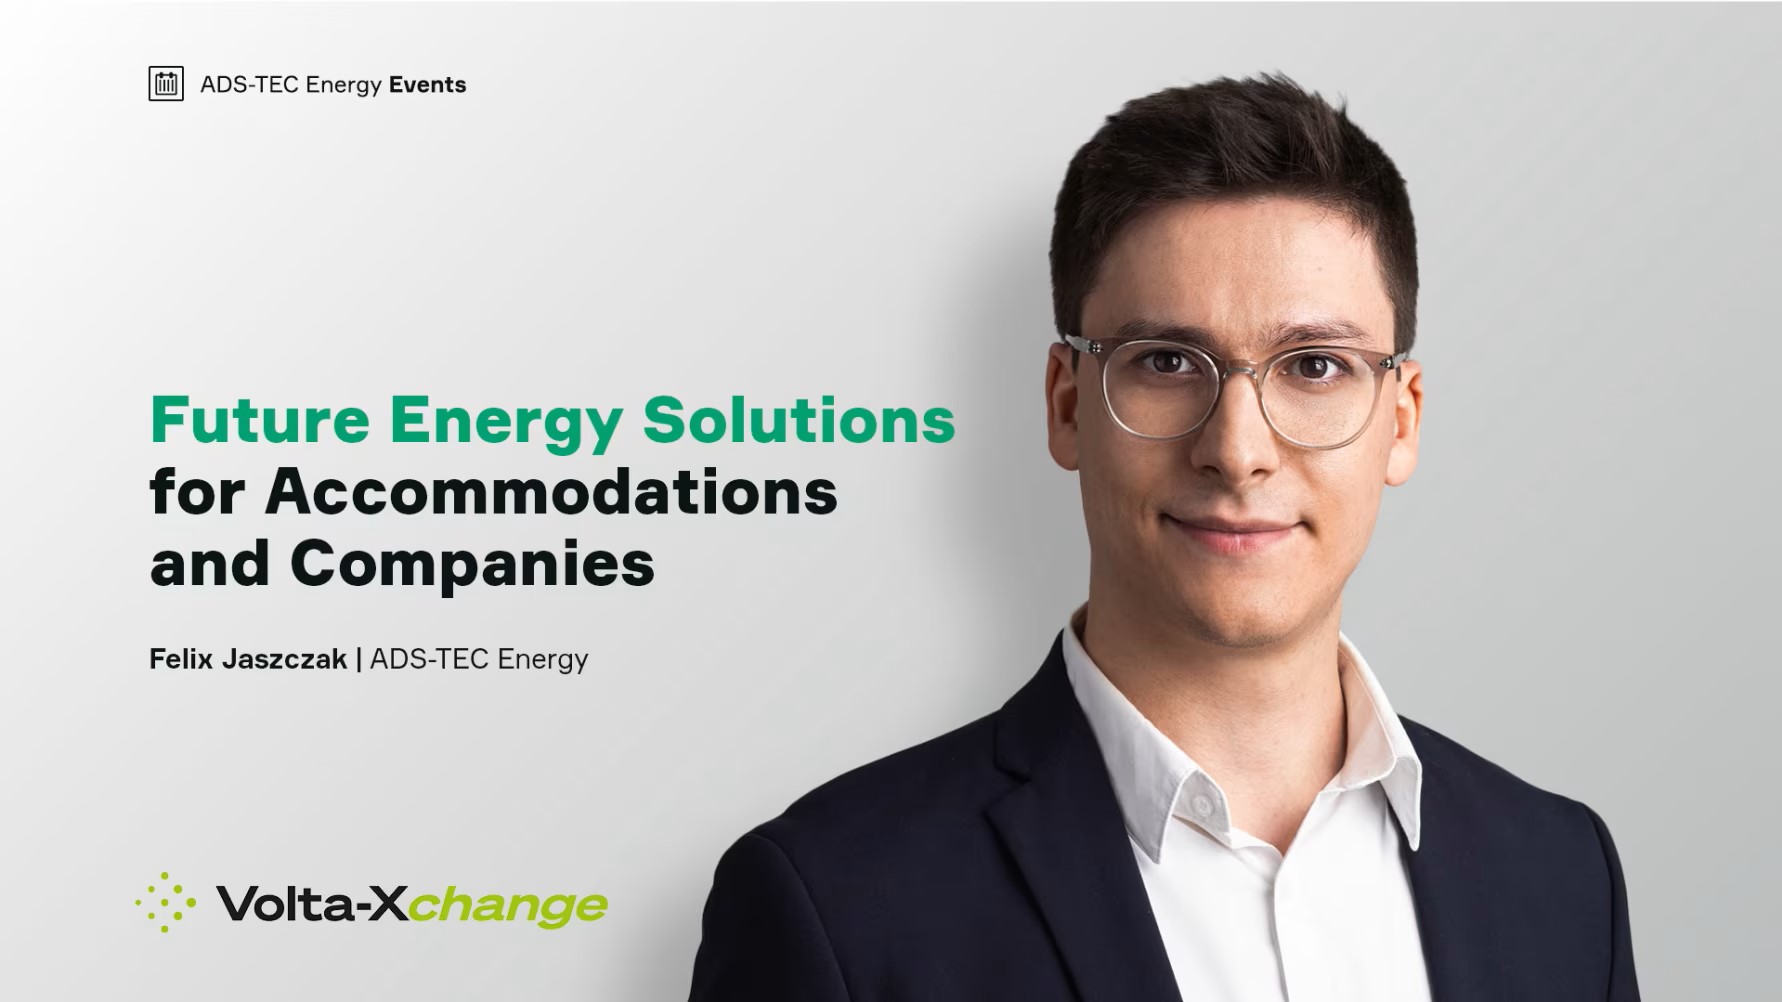 Taking maximum advantage of sustainable energy sources while covering peaks in demand on the existing grids calls for flexible storage facilities - Felix Jaszczak. Photo: Ads-Tec Energy